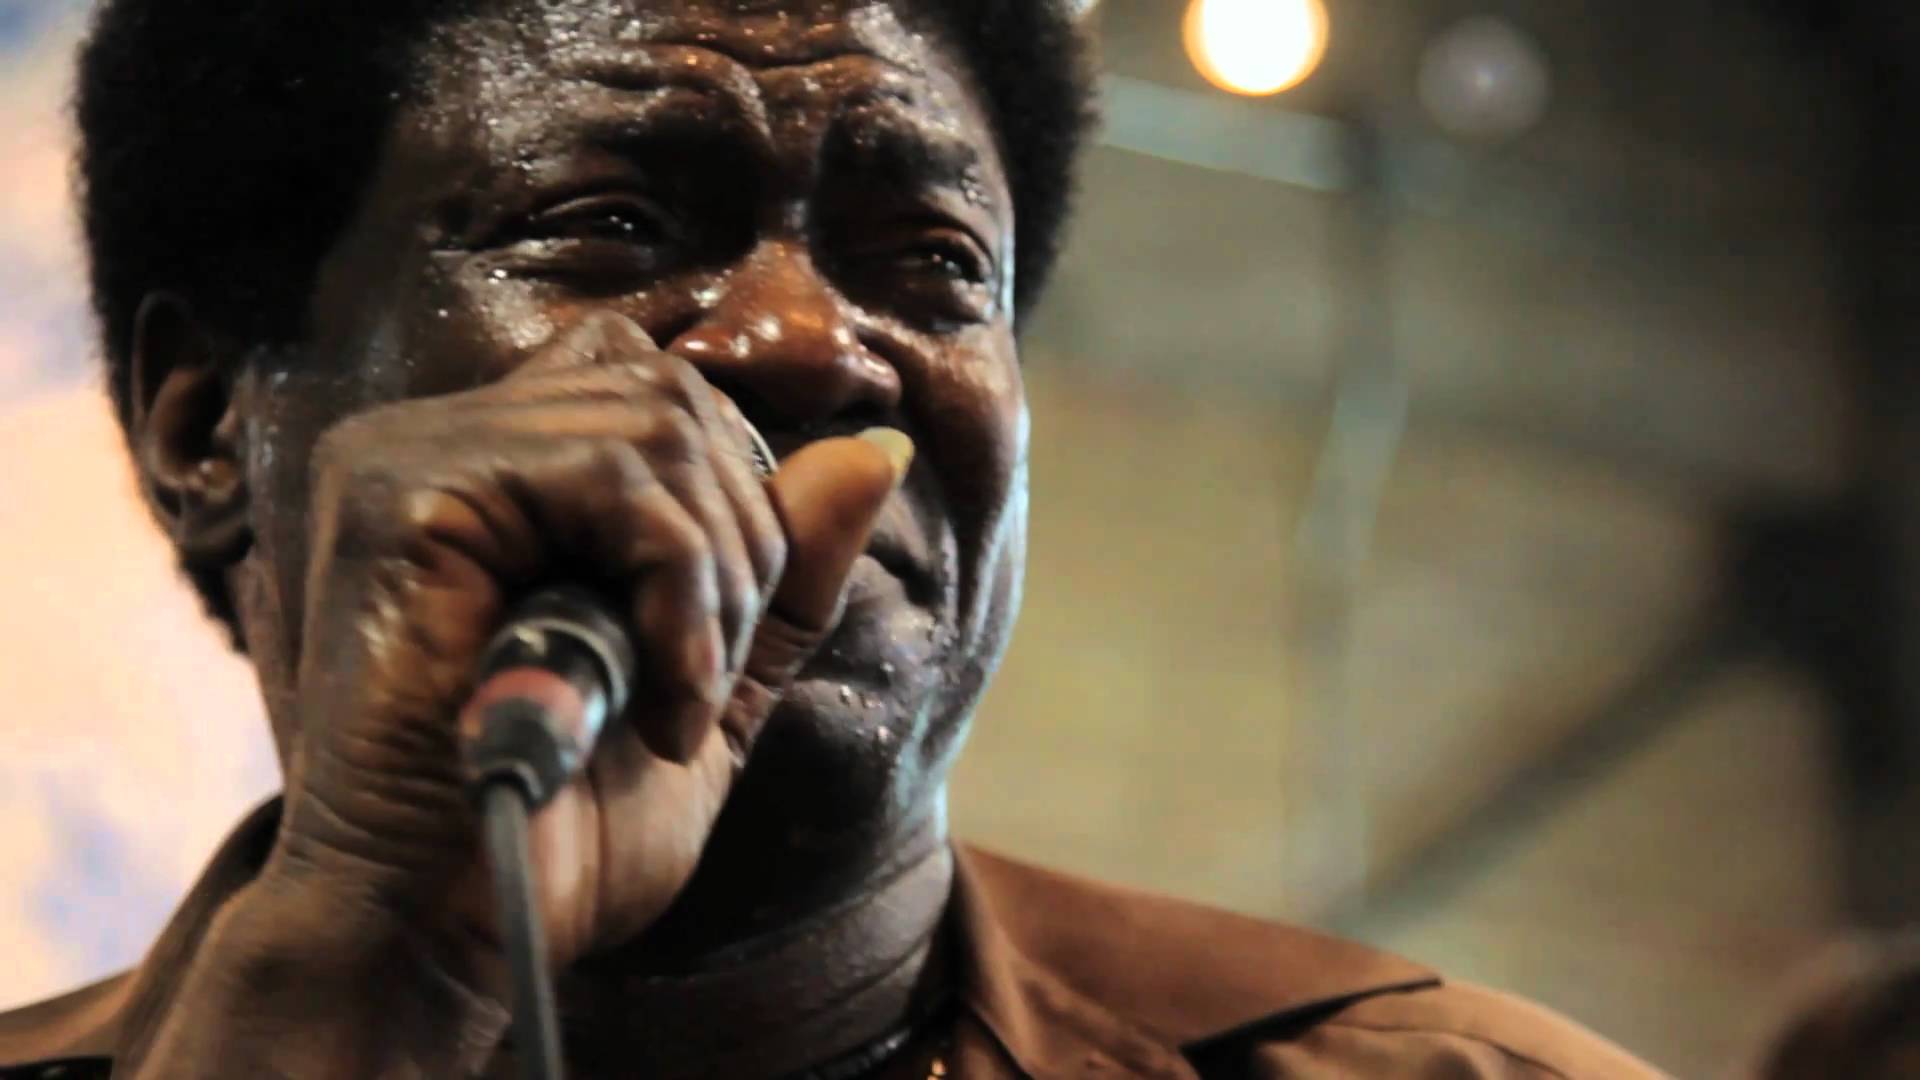 rip charles bradley - Radio Clash Podcast RIP Charles Bradley Radio Clash Music Mashup Podcast brings you the best in eclectic tunes, mashups and remixes from around the world. Since 2004, we've been bringing you the freshest and most innovative music from a diverse range of genres and cultures. Join us on our musical journey as we explore the sounds of yesterday, today, and tomorrow. Discover new music and be inspired by the mashup of musical styles that only Radio Clash can provide. Subscribe now to elevate your musical experience!